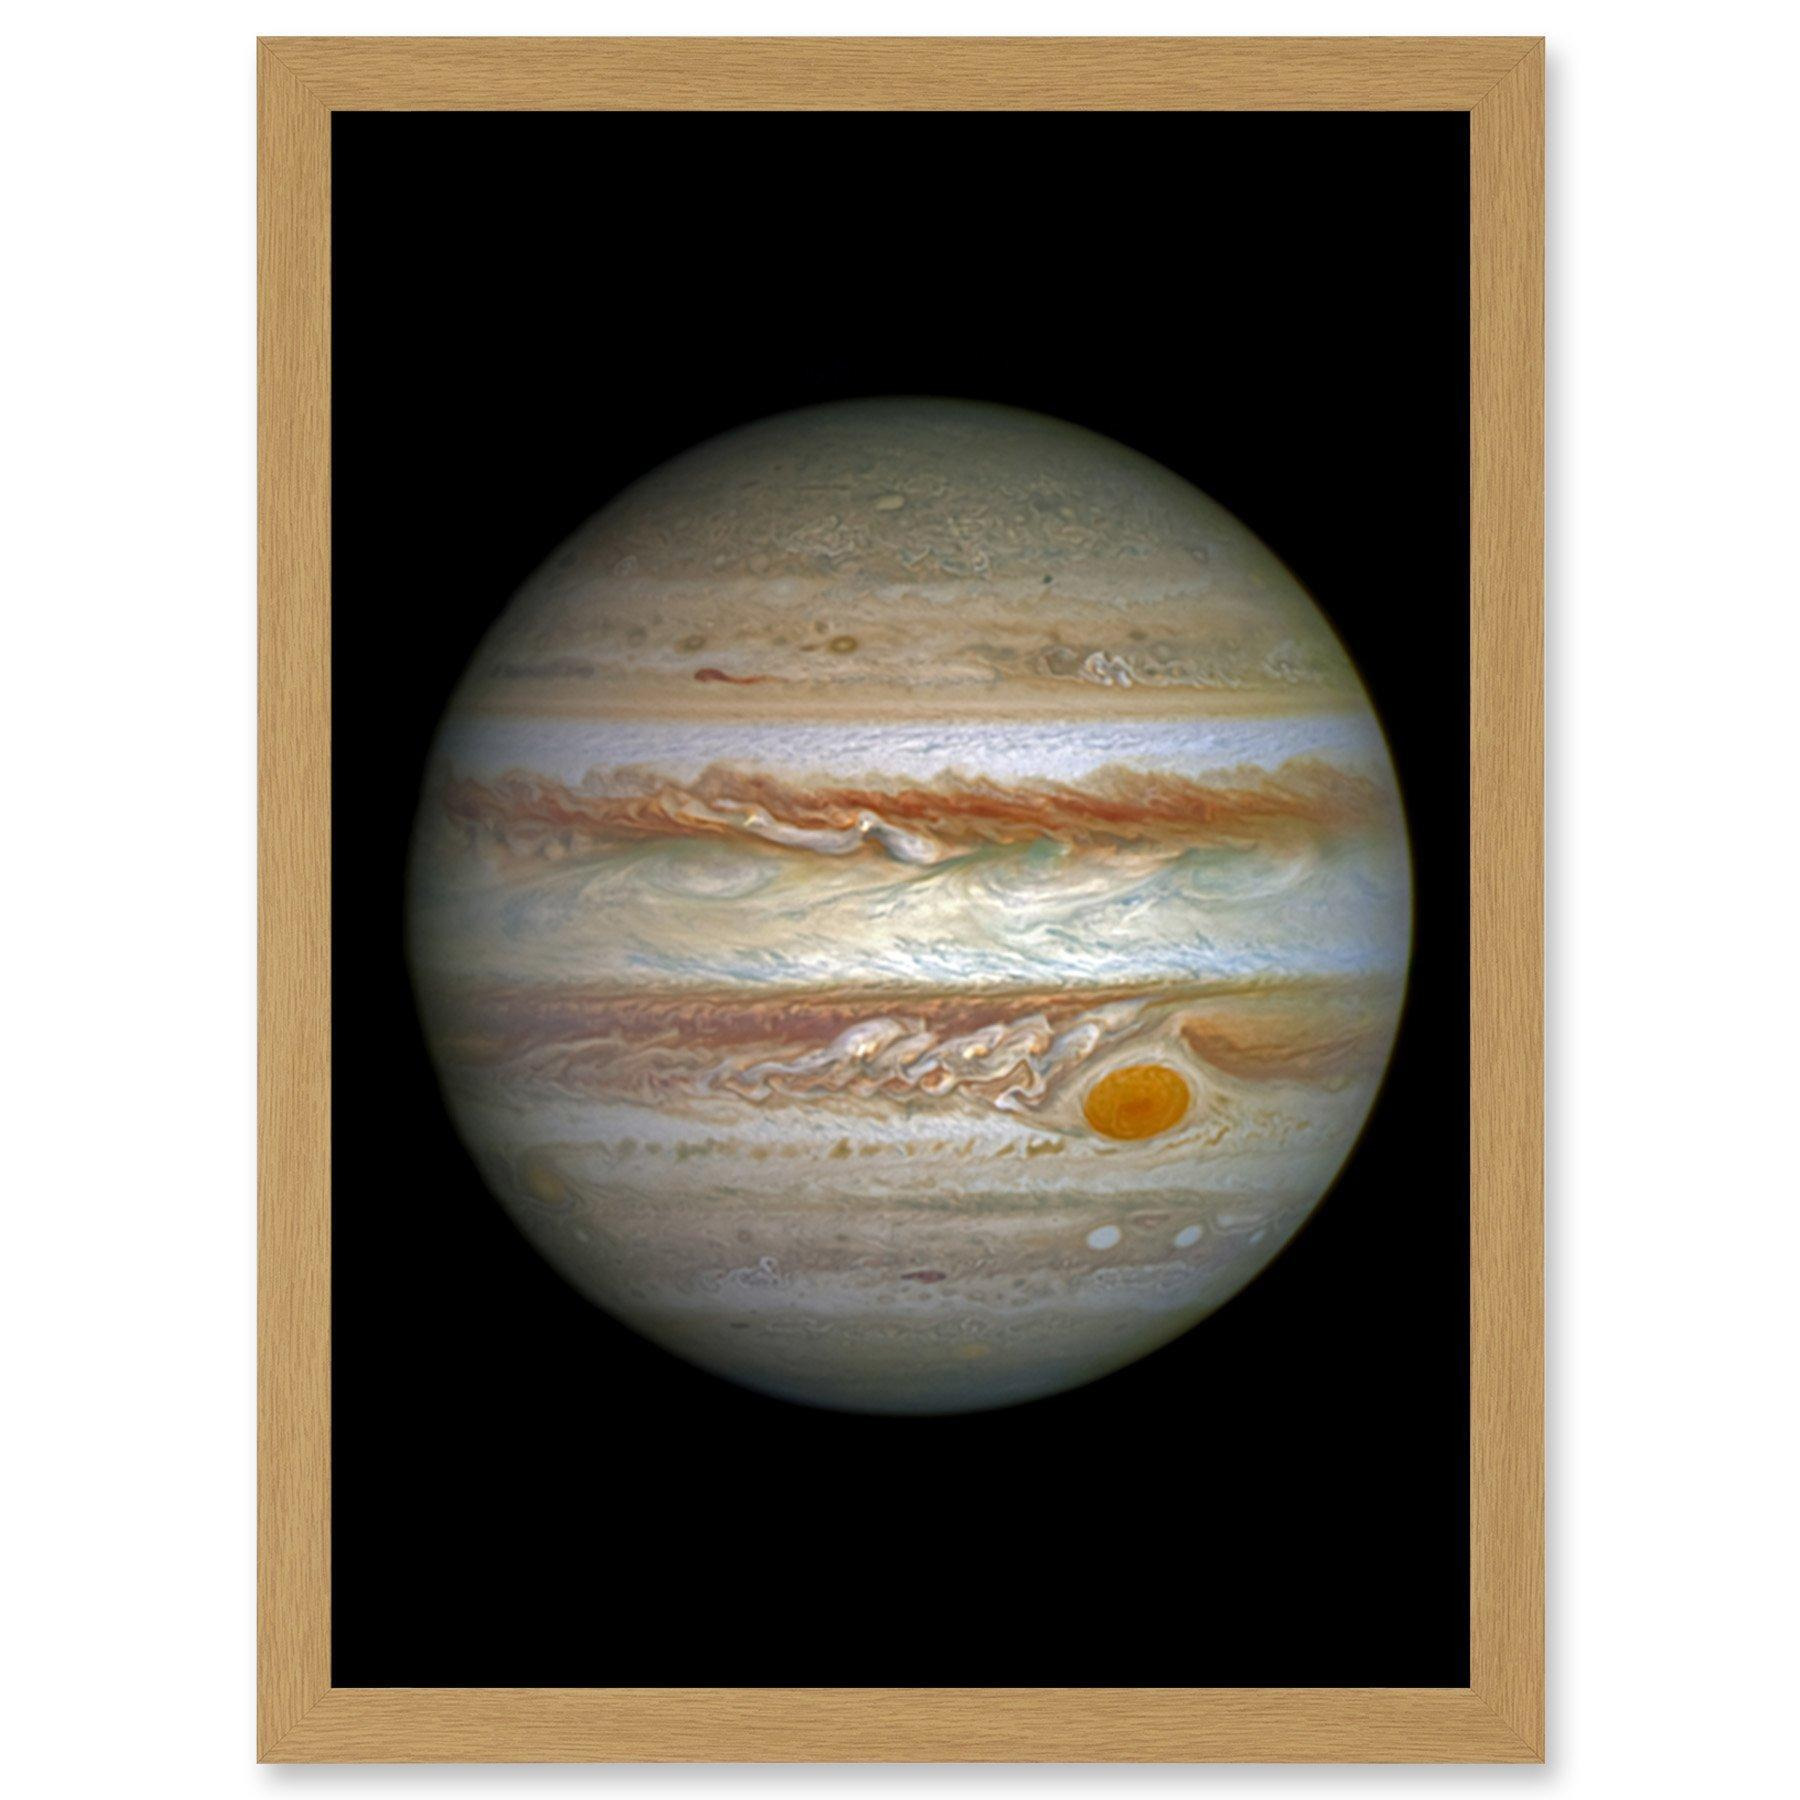 Hubble Space Telescope Image Jupiter WFC3/UVIS Largest Planet In Our Solar System Great Red Spot View Anticyclone And Colourful Atmosphere Bands Art Print Framed Poster Wall Decor - image 1